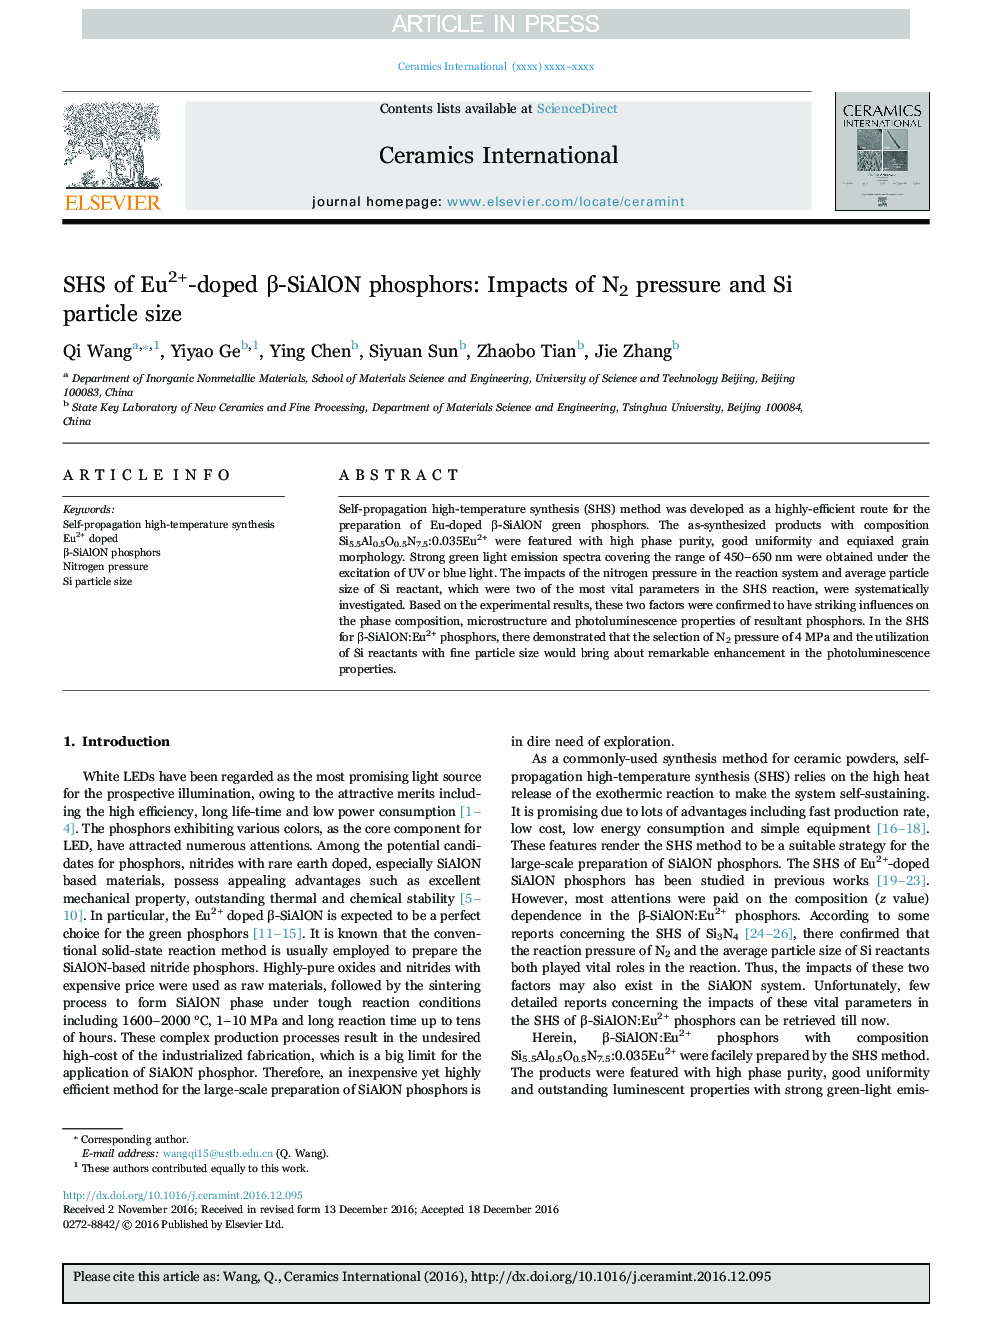 SHS of Eu2+-doped Î²-SiAlON phosphors: Impacts of N2 pressure and Si particle size